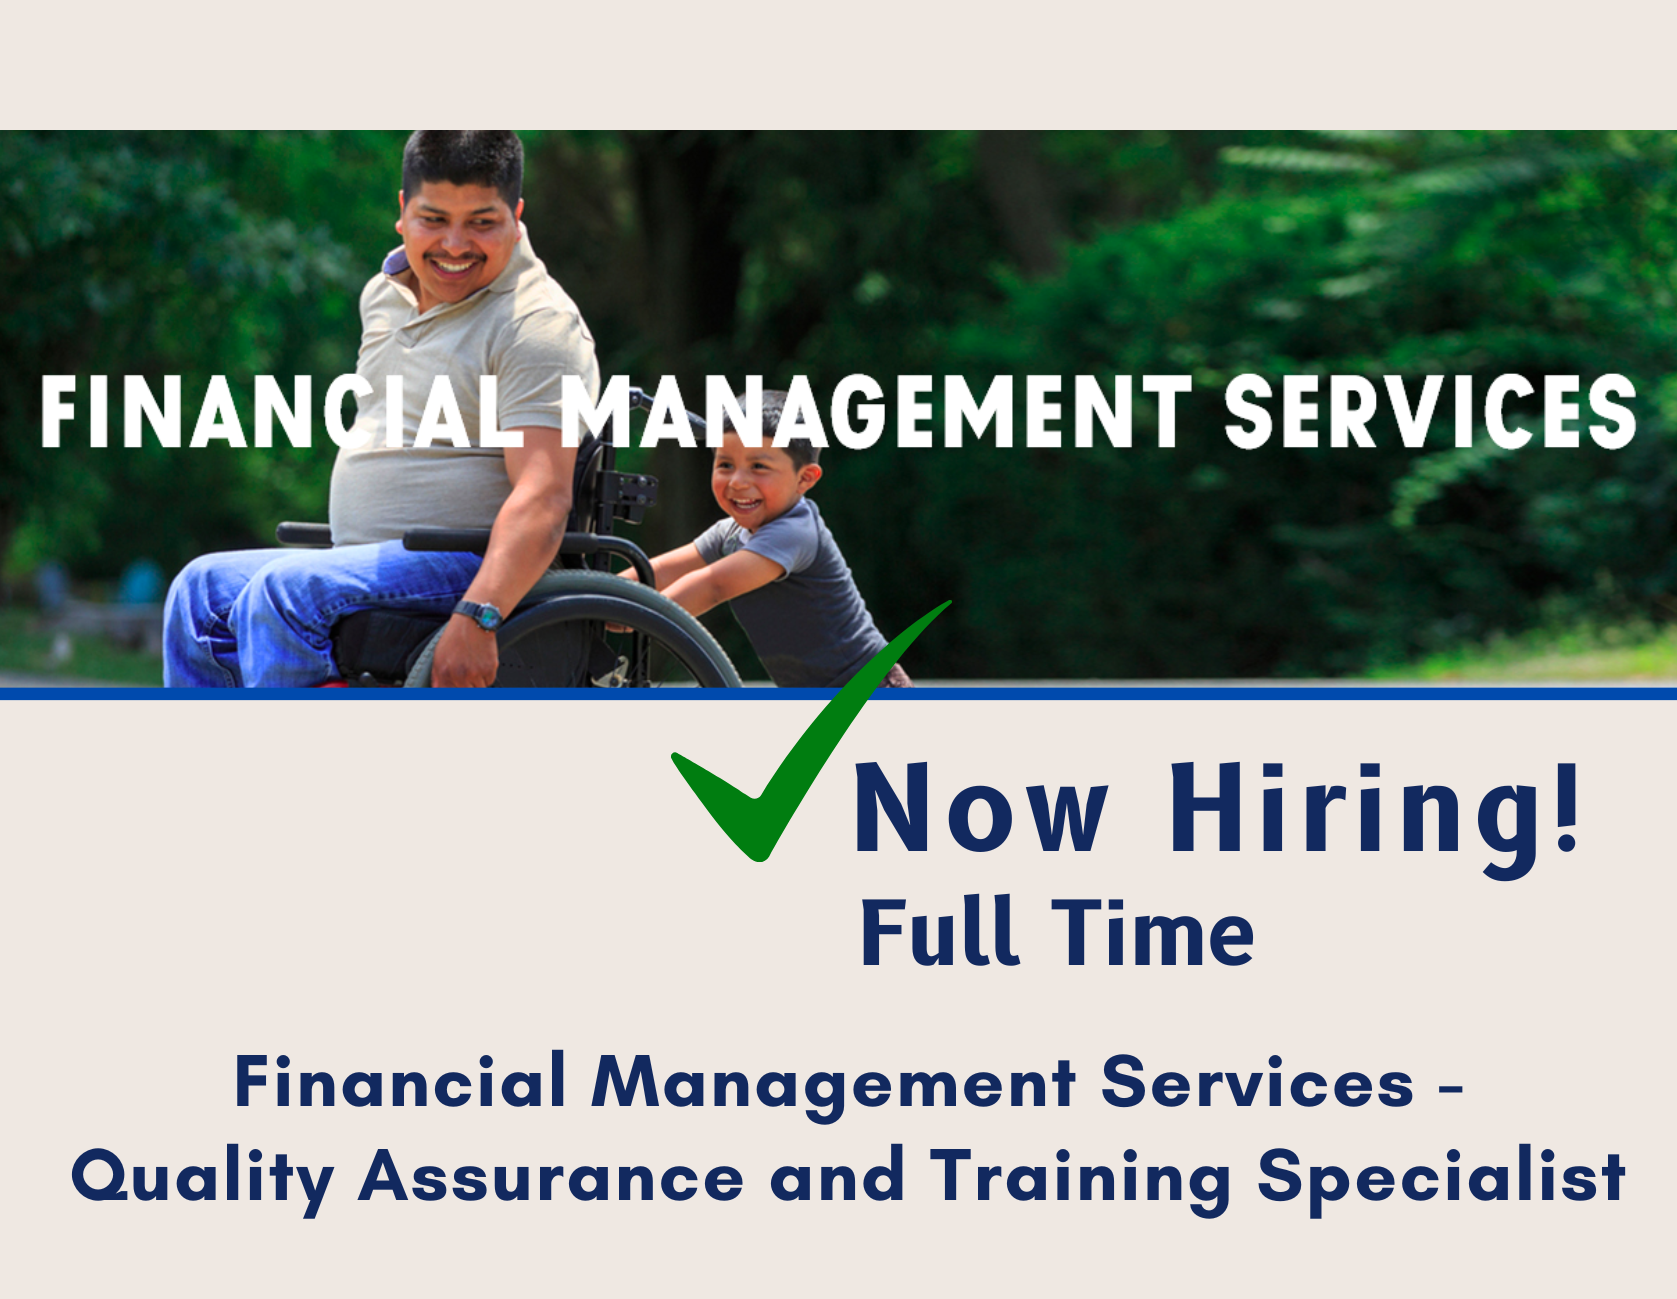 image of a man using a wheelchair in a parklike setting, looking back and smiling at a young boy pushing his chair. Text reads: Now Hiring. Full Time Quality Assurance and Training Specialist, Financial Management Services